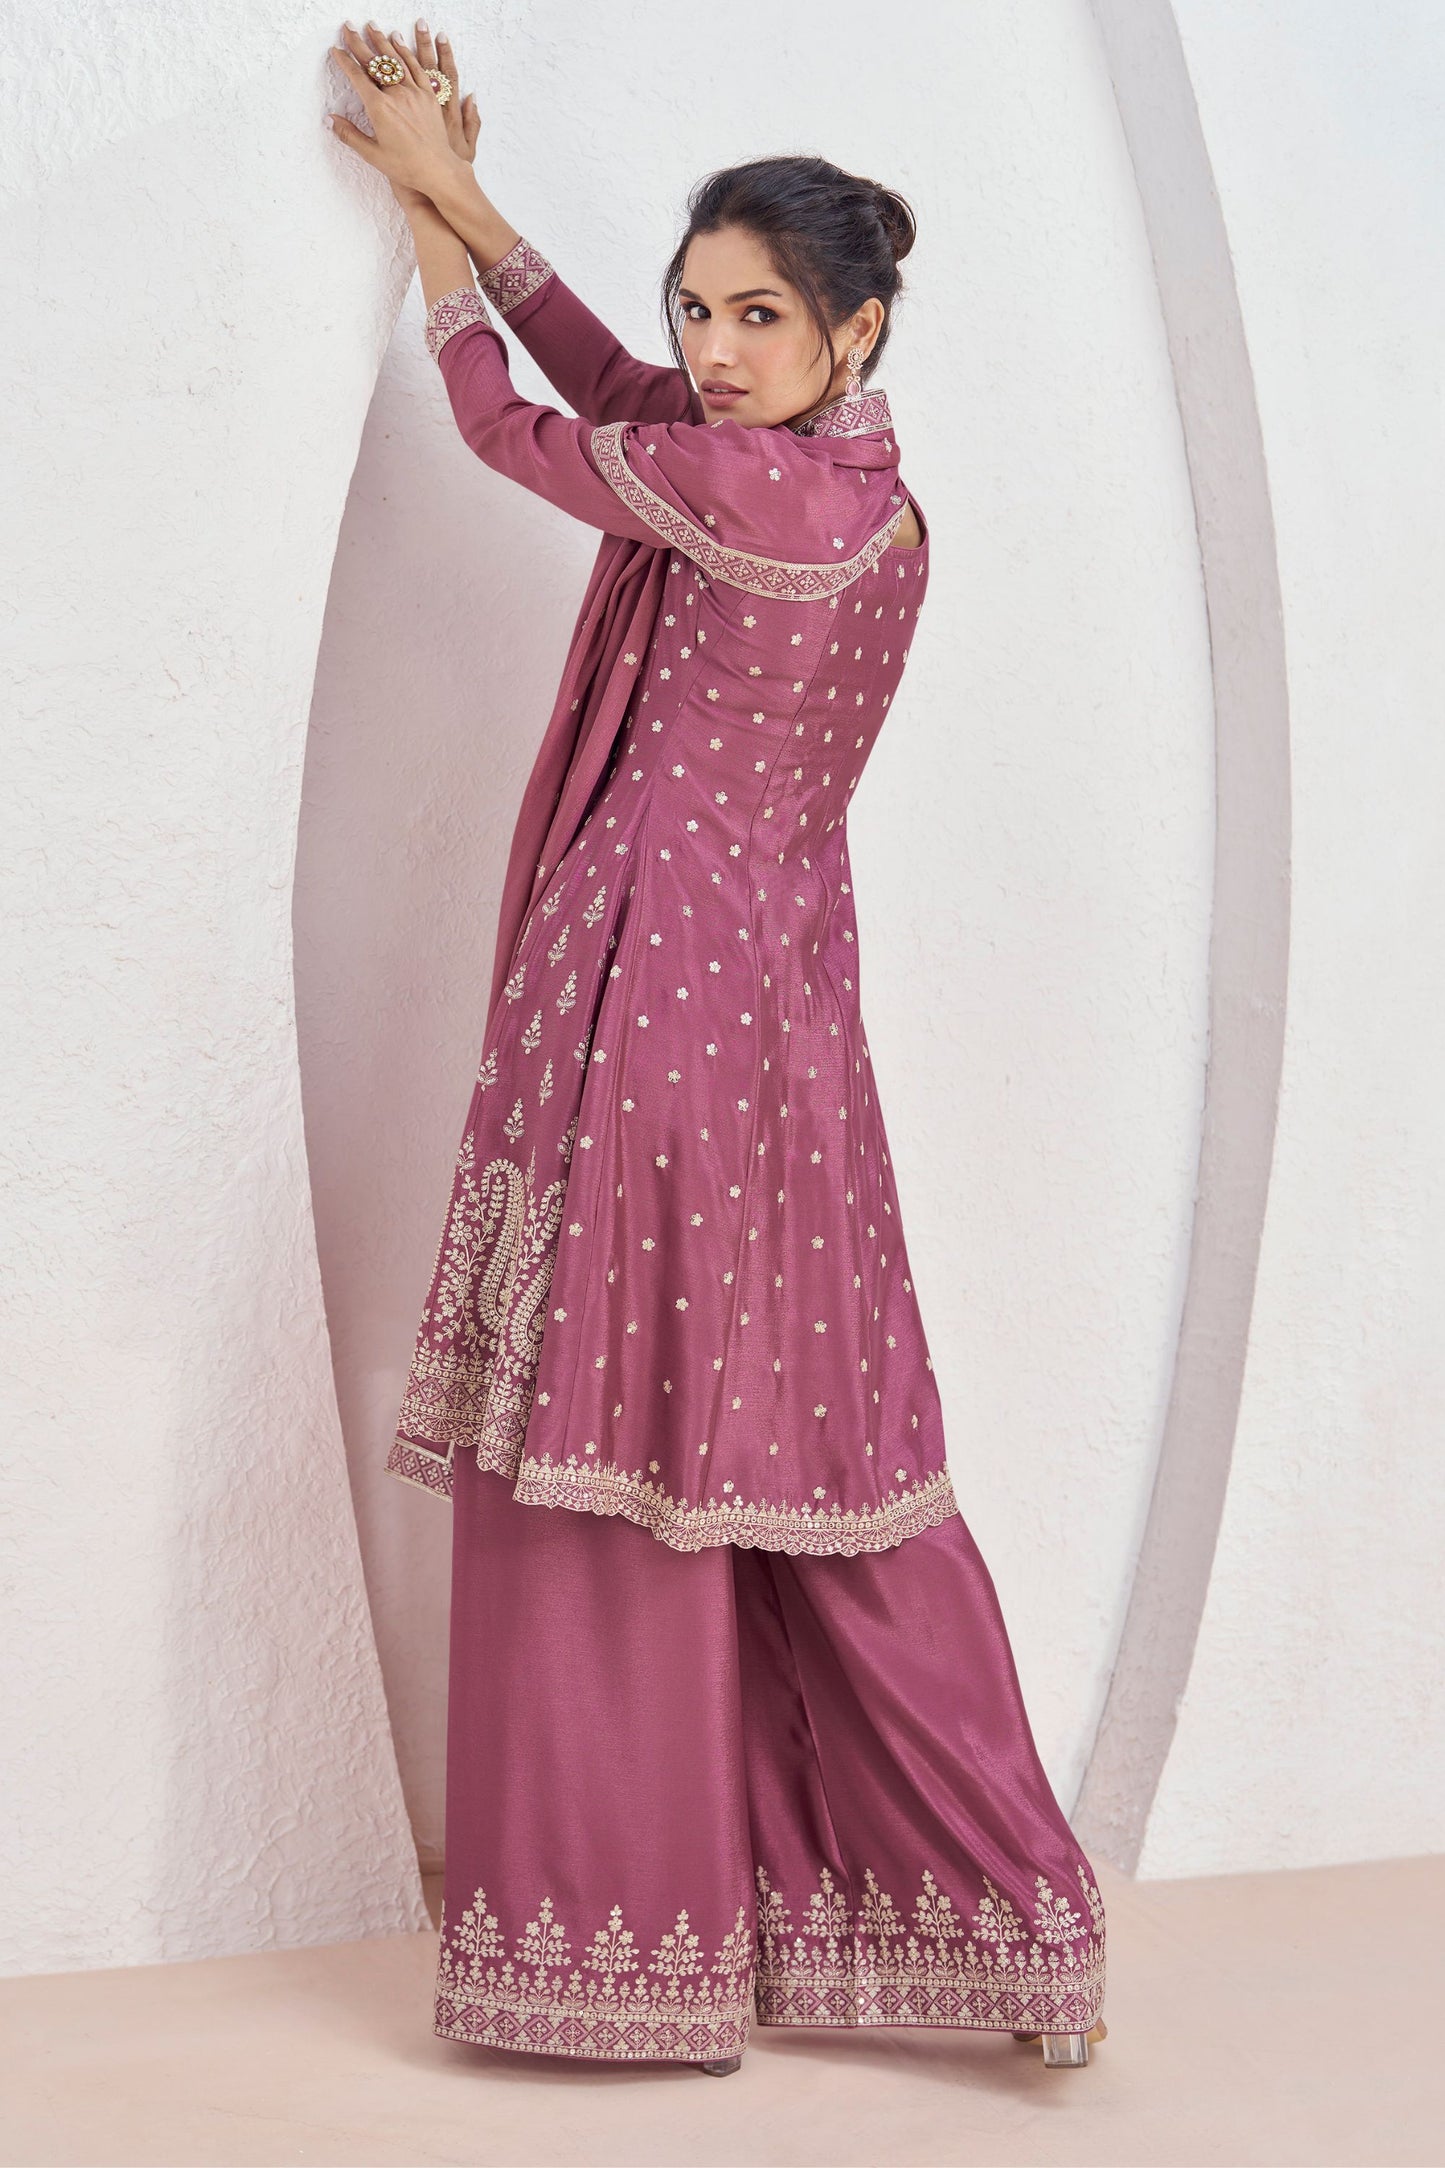 Pink Chinon Silk Palazzo Suit For Indian Festival & Pakistani Weddings - Embroidery Work